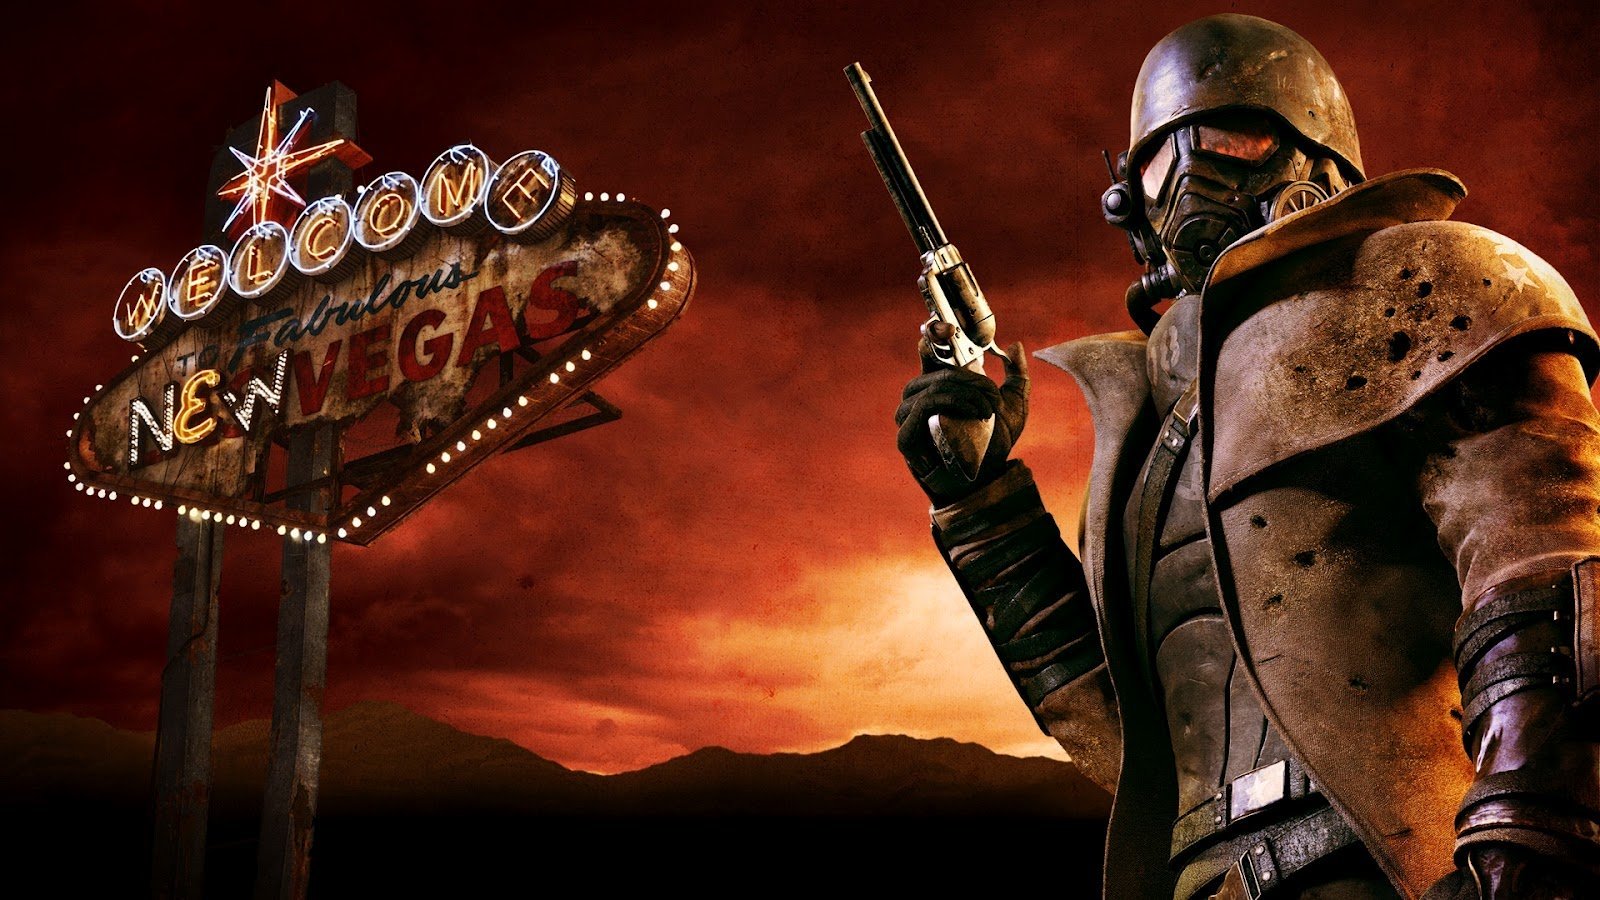 Fallout: New Vegas in the style of Fallout 2 : r/fnv